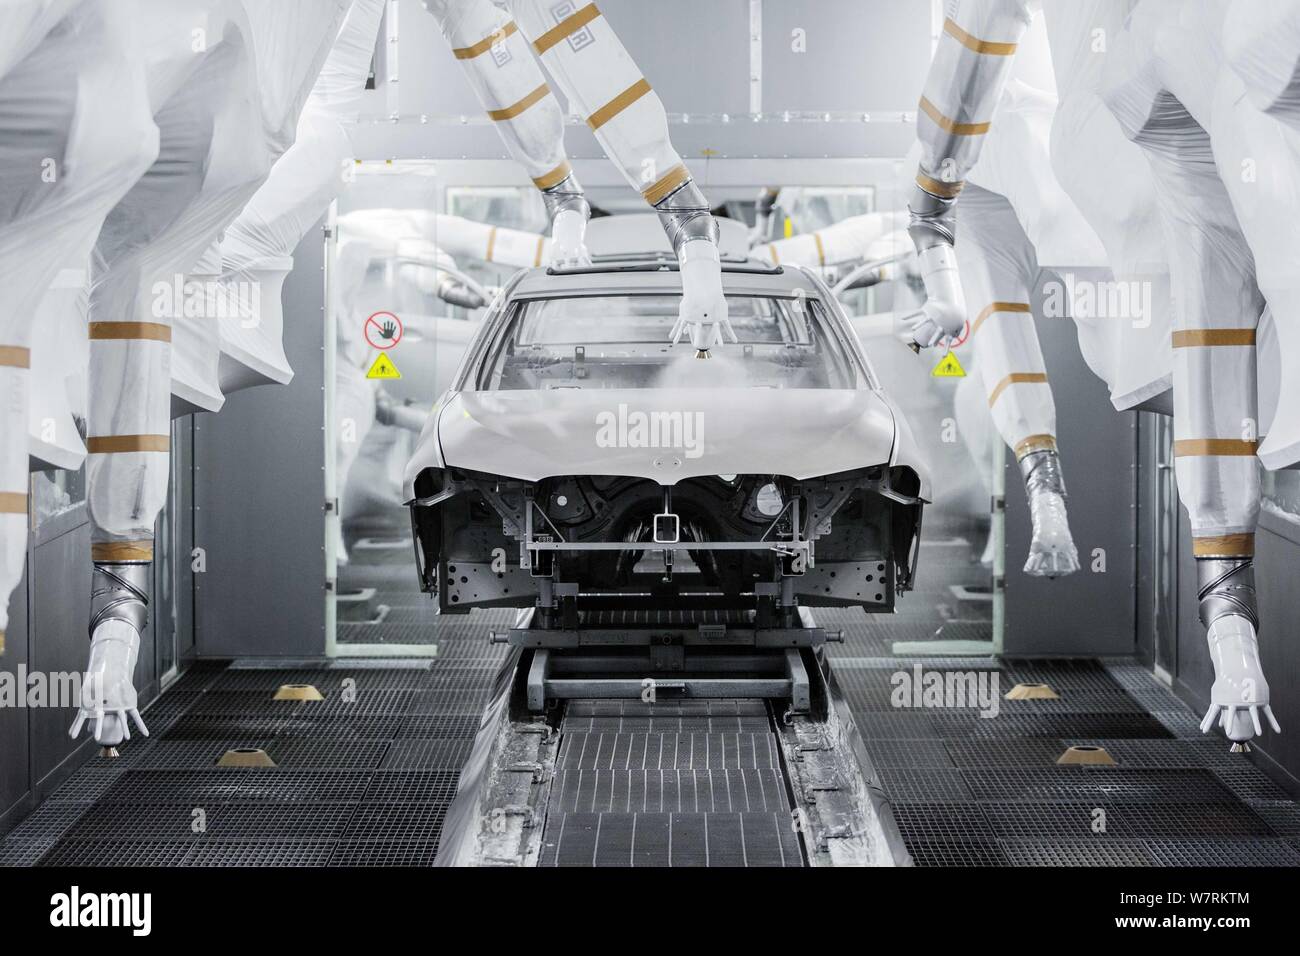 (190807) -- Beijing, Aug. 7, 2019 (Xinhua) -- Undated file photo shows industrial robotic arms paint a car at Dadong Plant of BMW Brilliance Automotive (BBA) in Shenyang, capital of northeast China's Liaoning Province. (Xinhua) Stock Photo